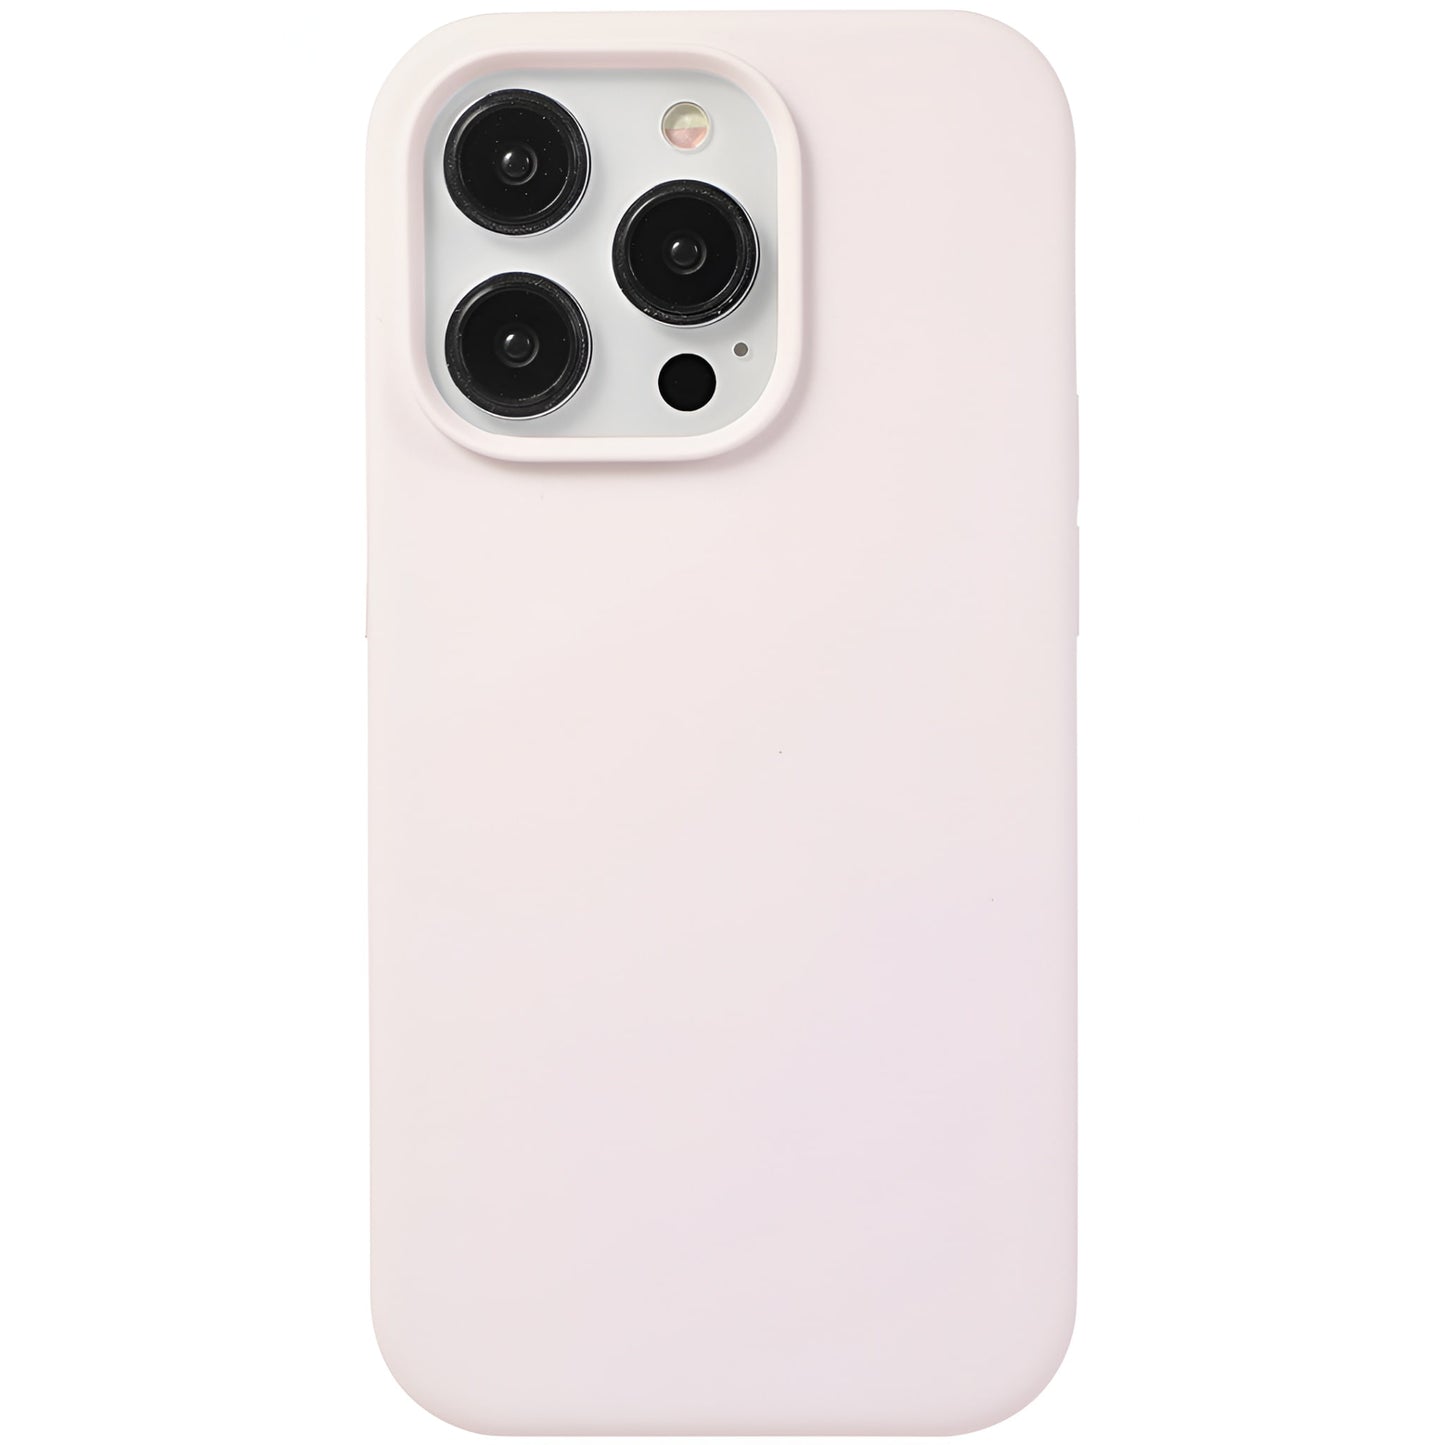 Colour Sky (Light Grey) - Phone Case For iPhone 12 Pro